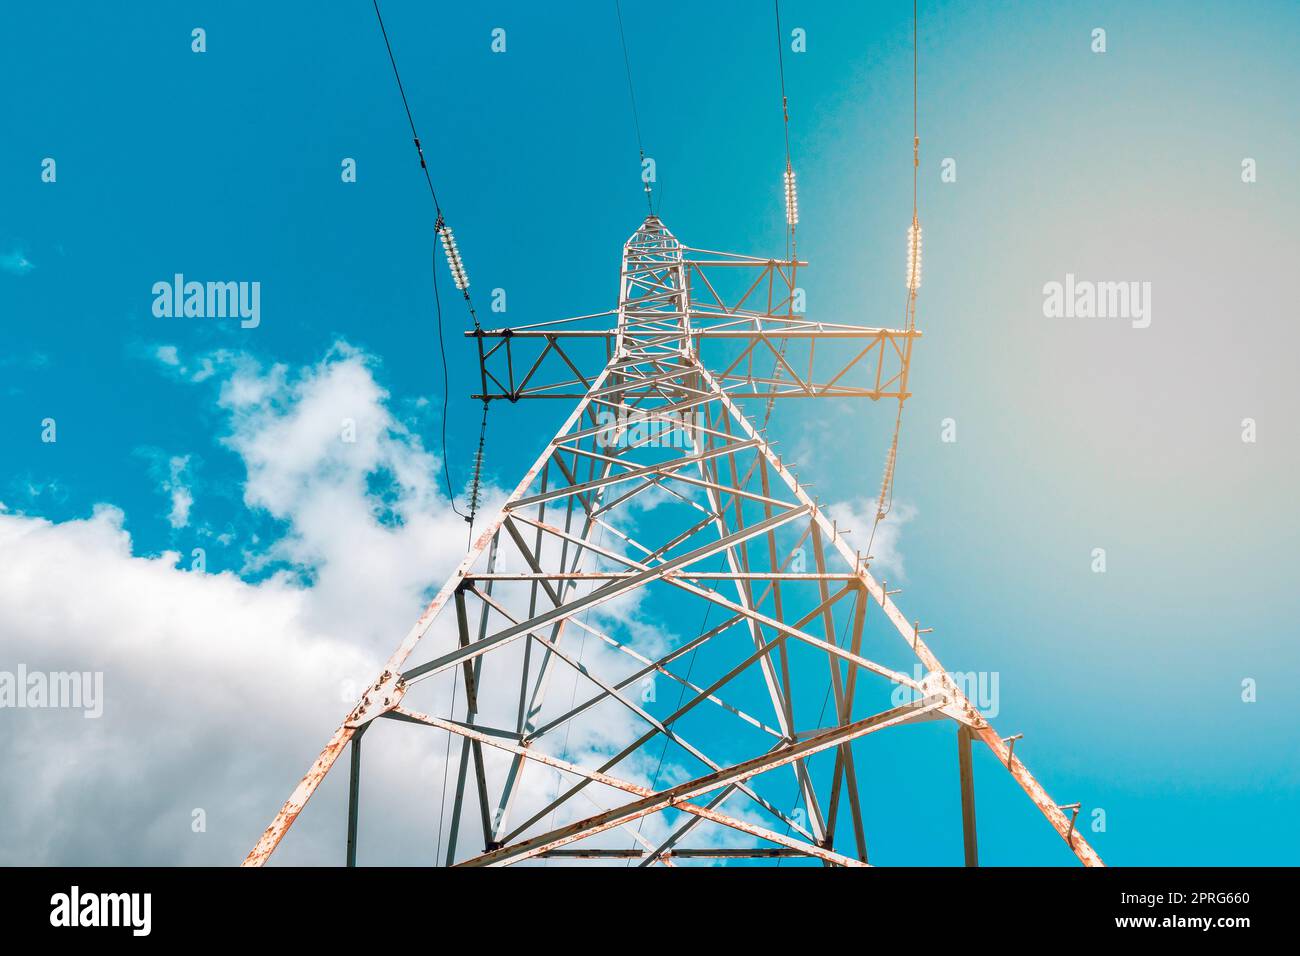 High voltage tower with electricity transmission power lines against blue sky Stock Photo